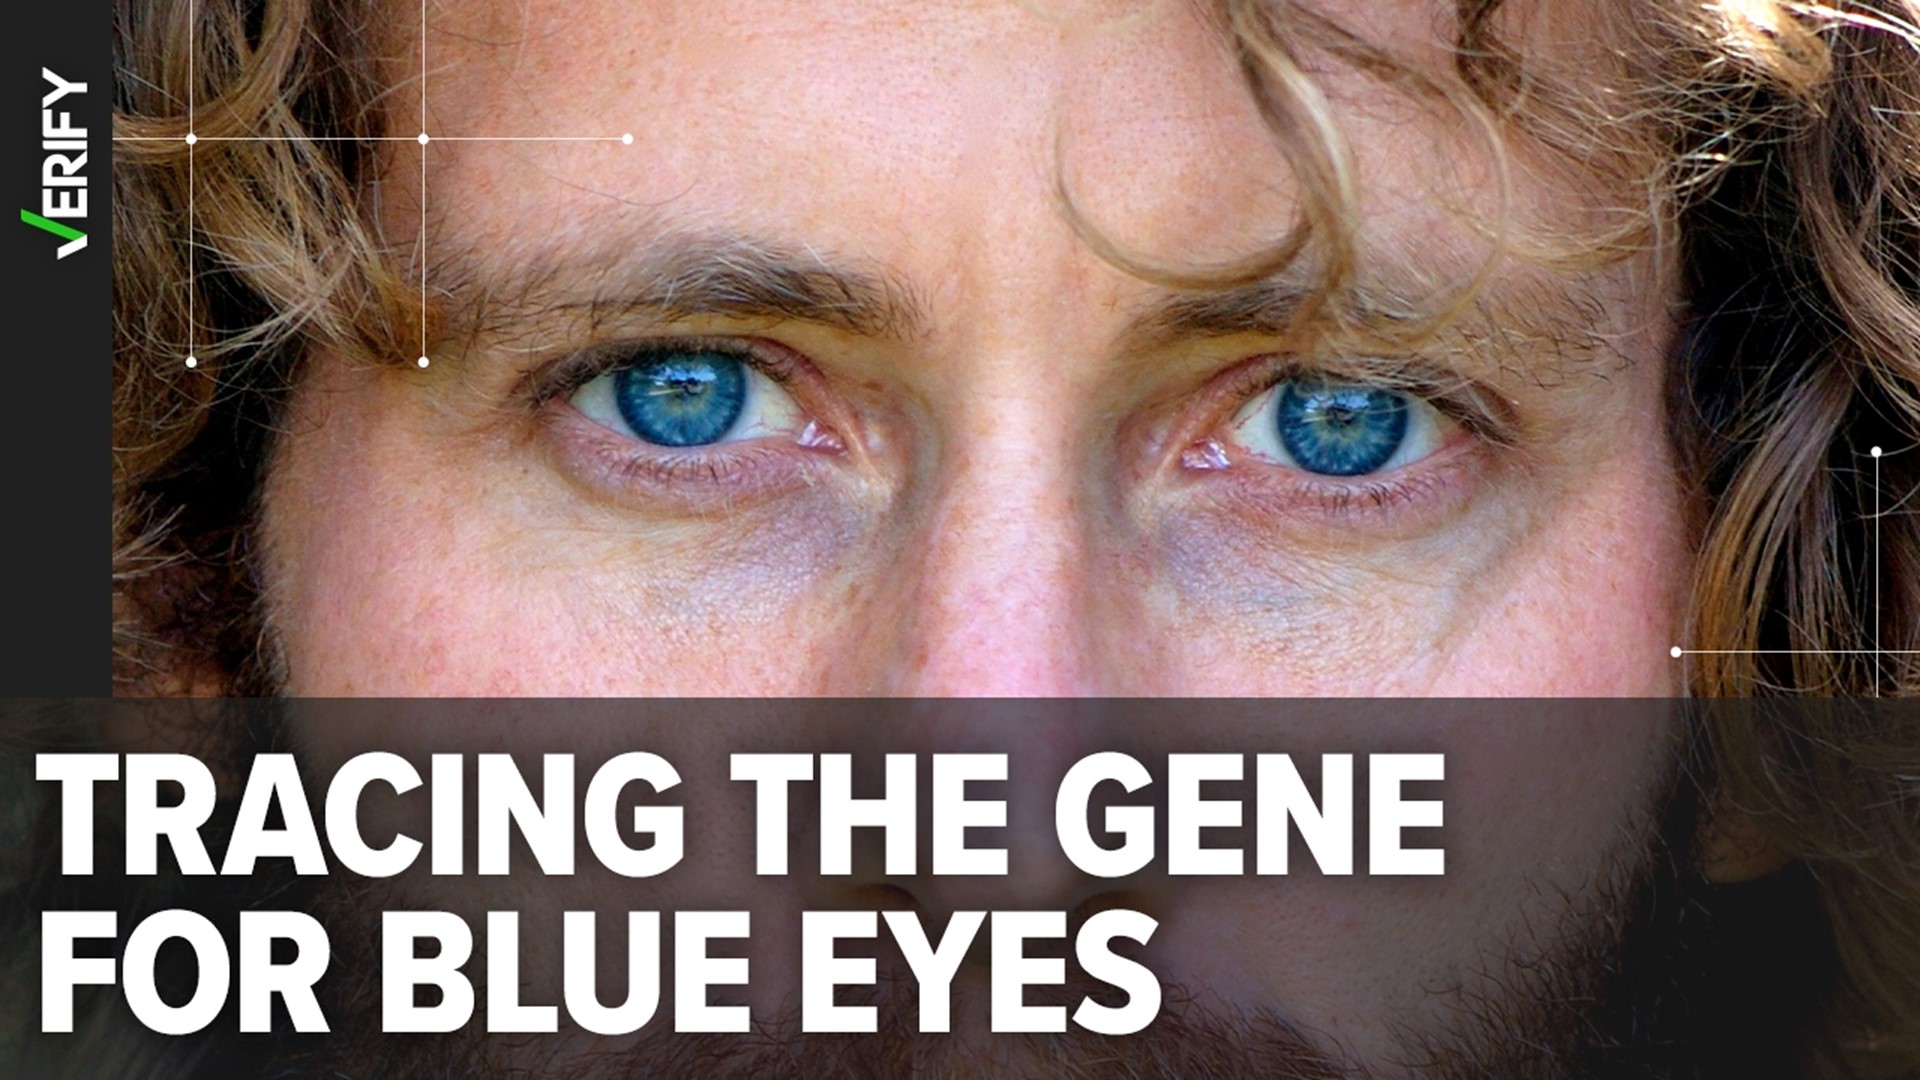 All blue-eyed people come from a shared common ancestor